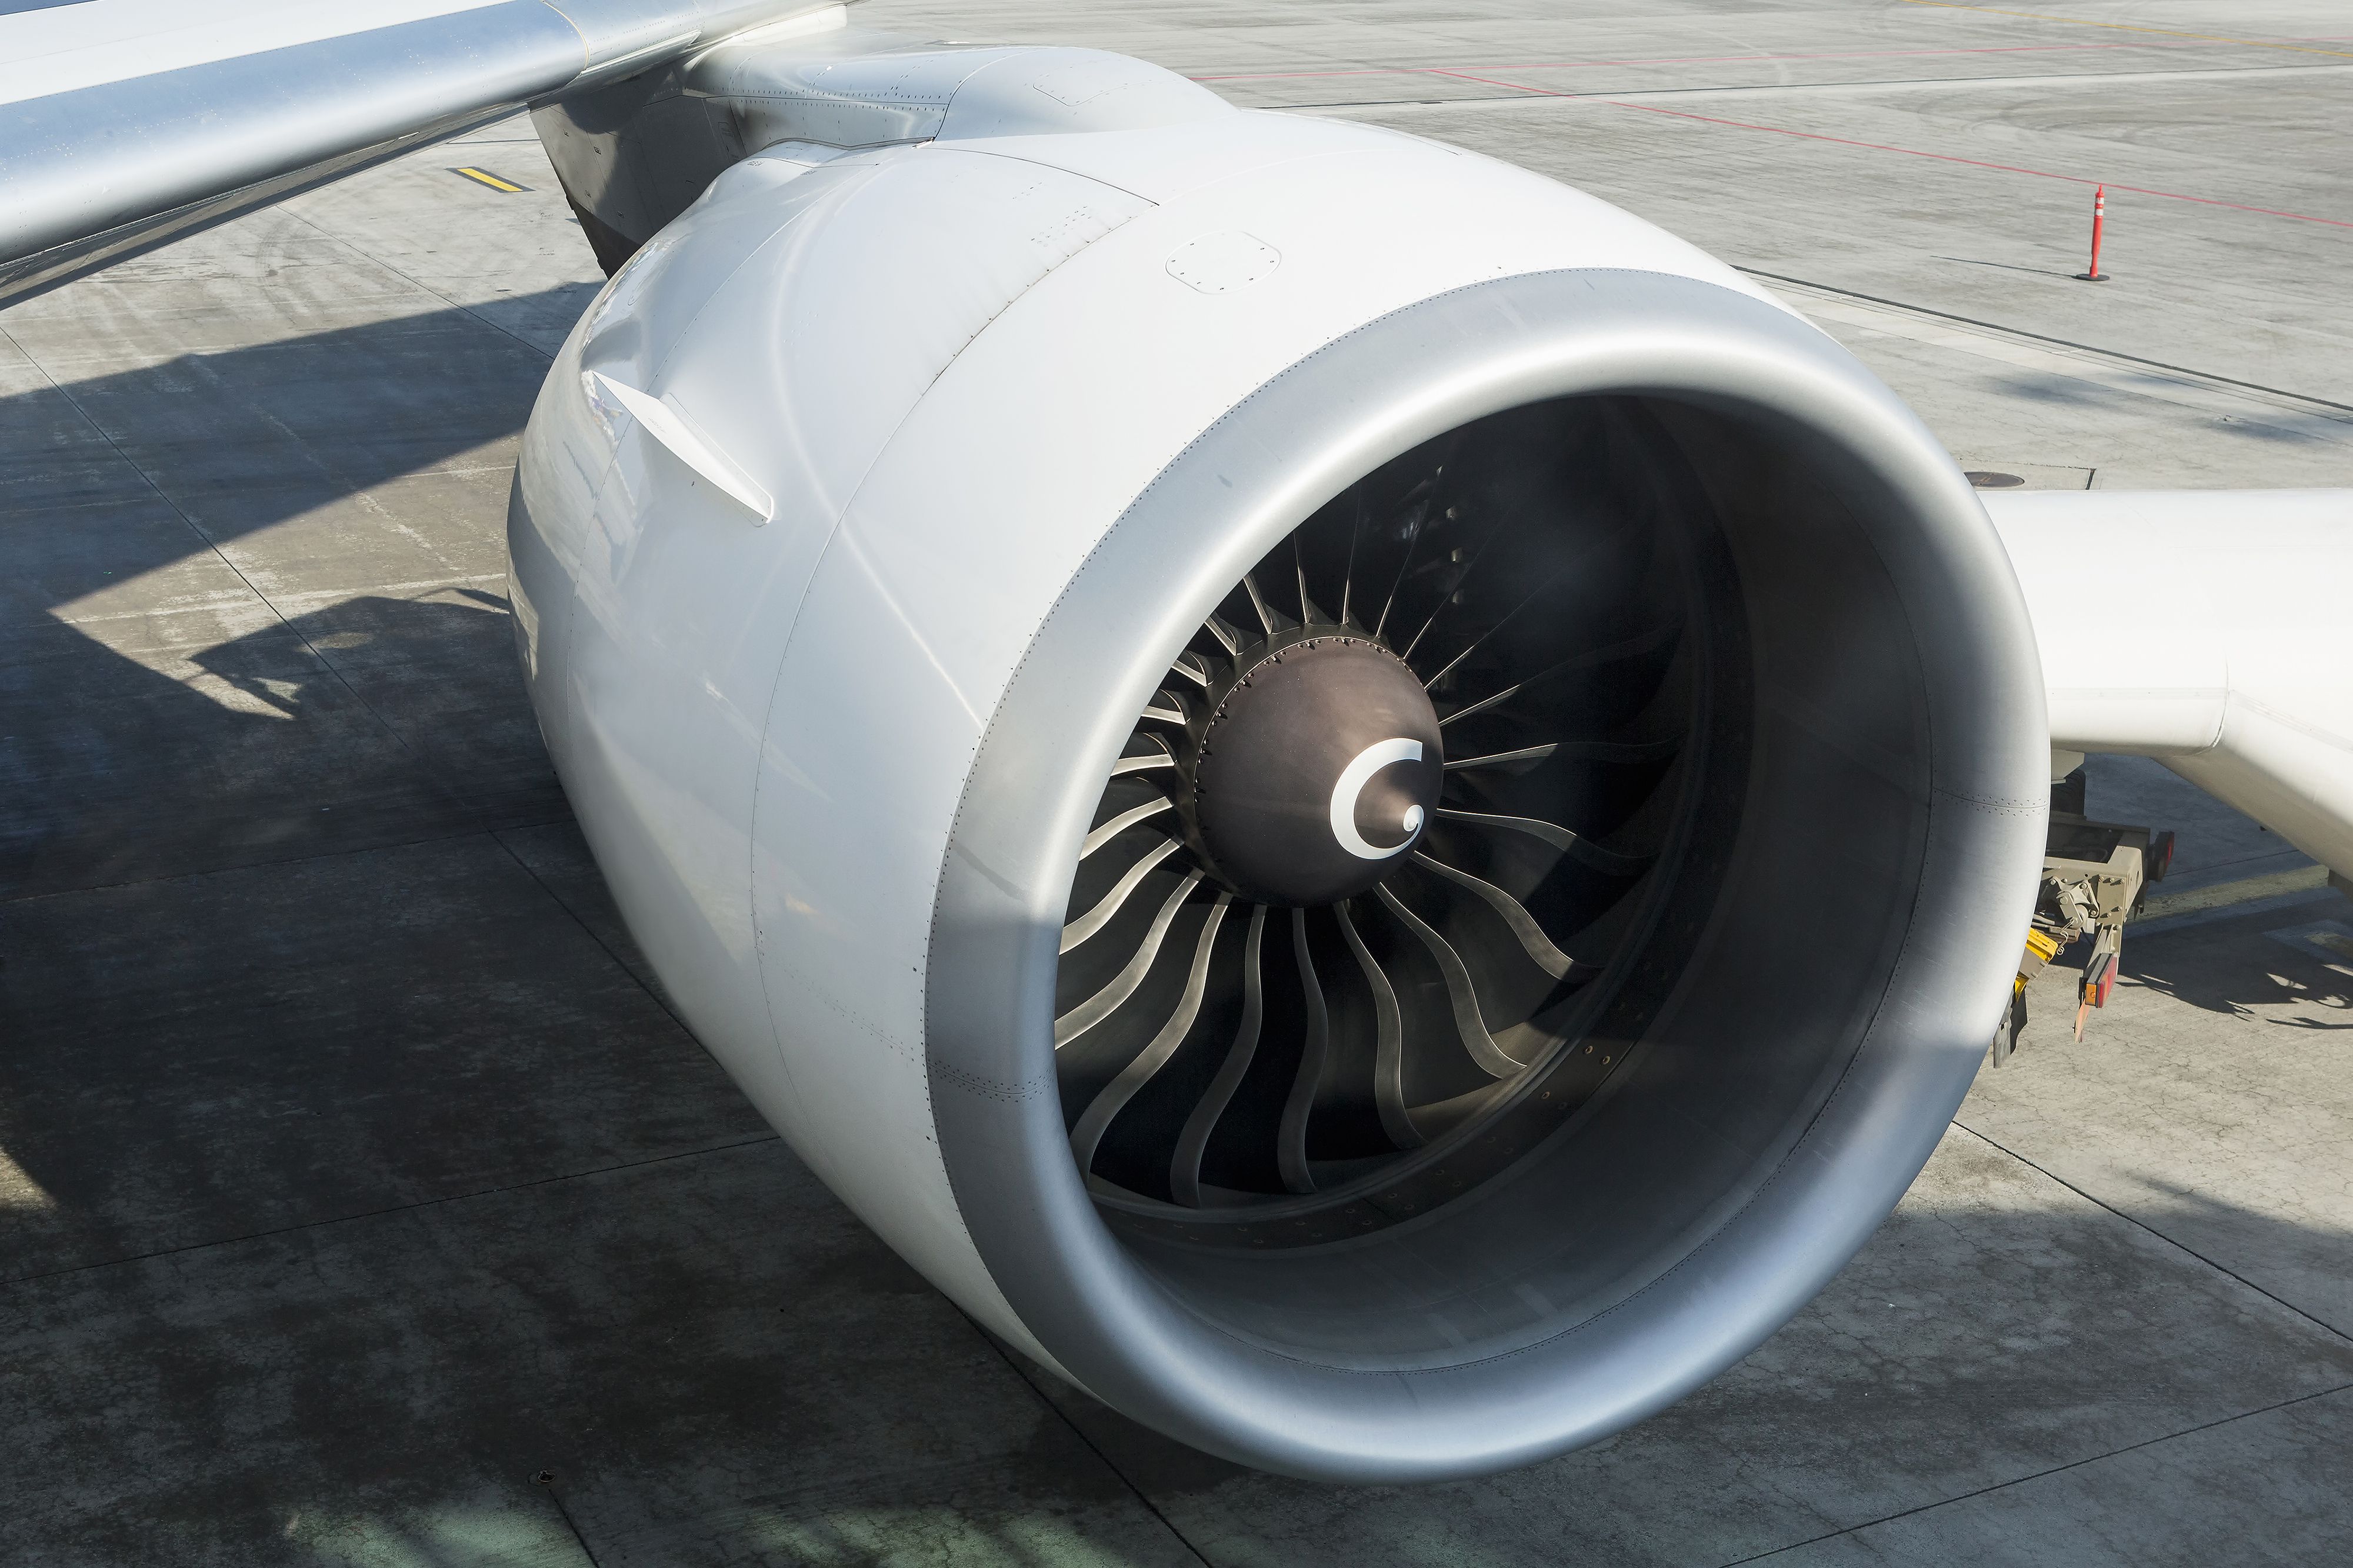 Detailed view of the appearance of the turbine blades of a Boeing 777 engine.